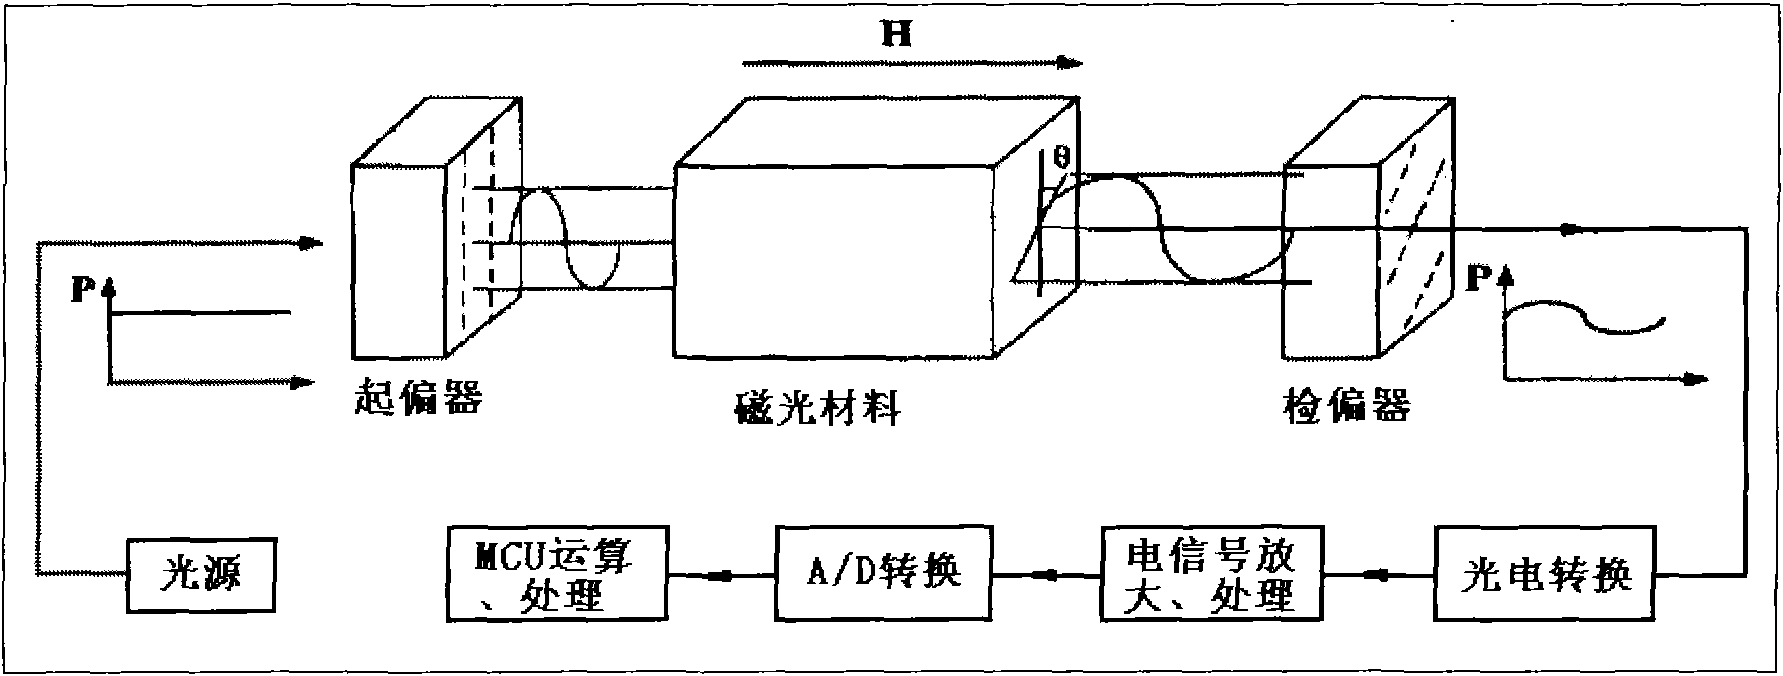 Primary current signal simulator for optical current transformer